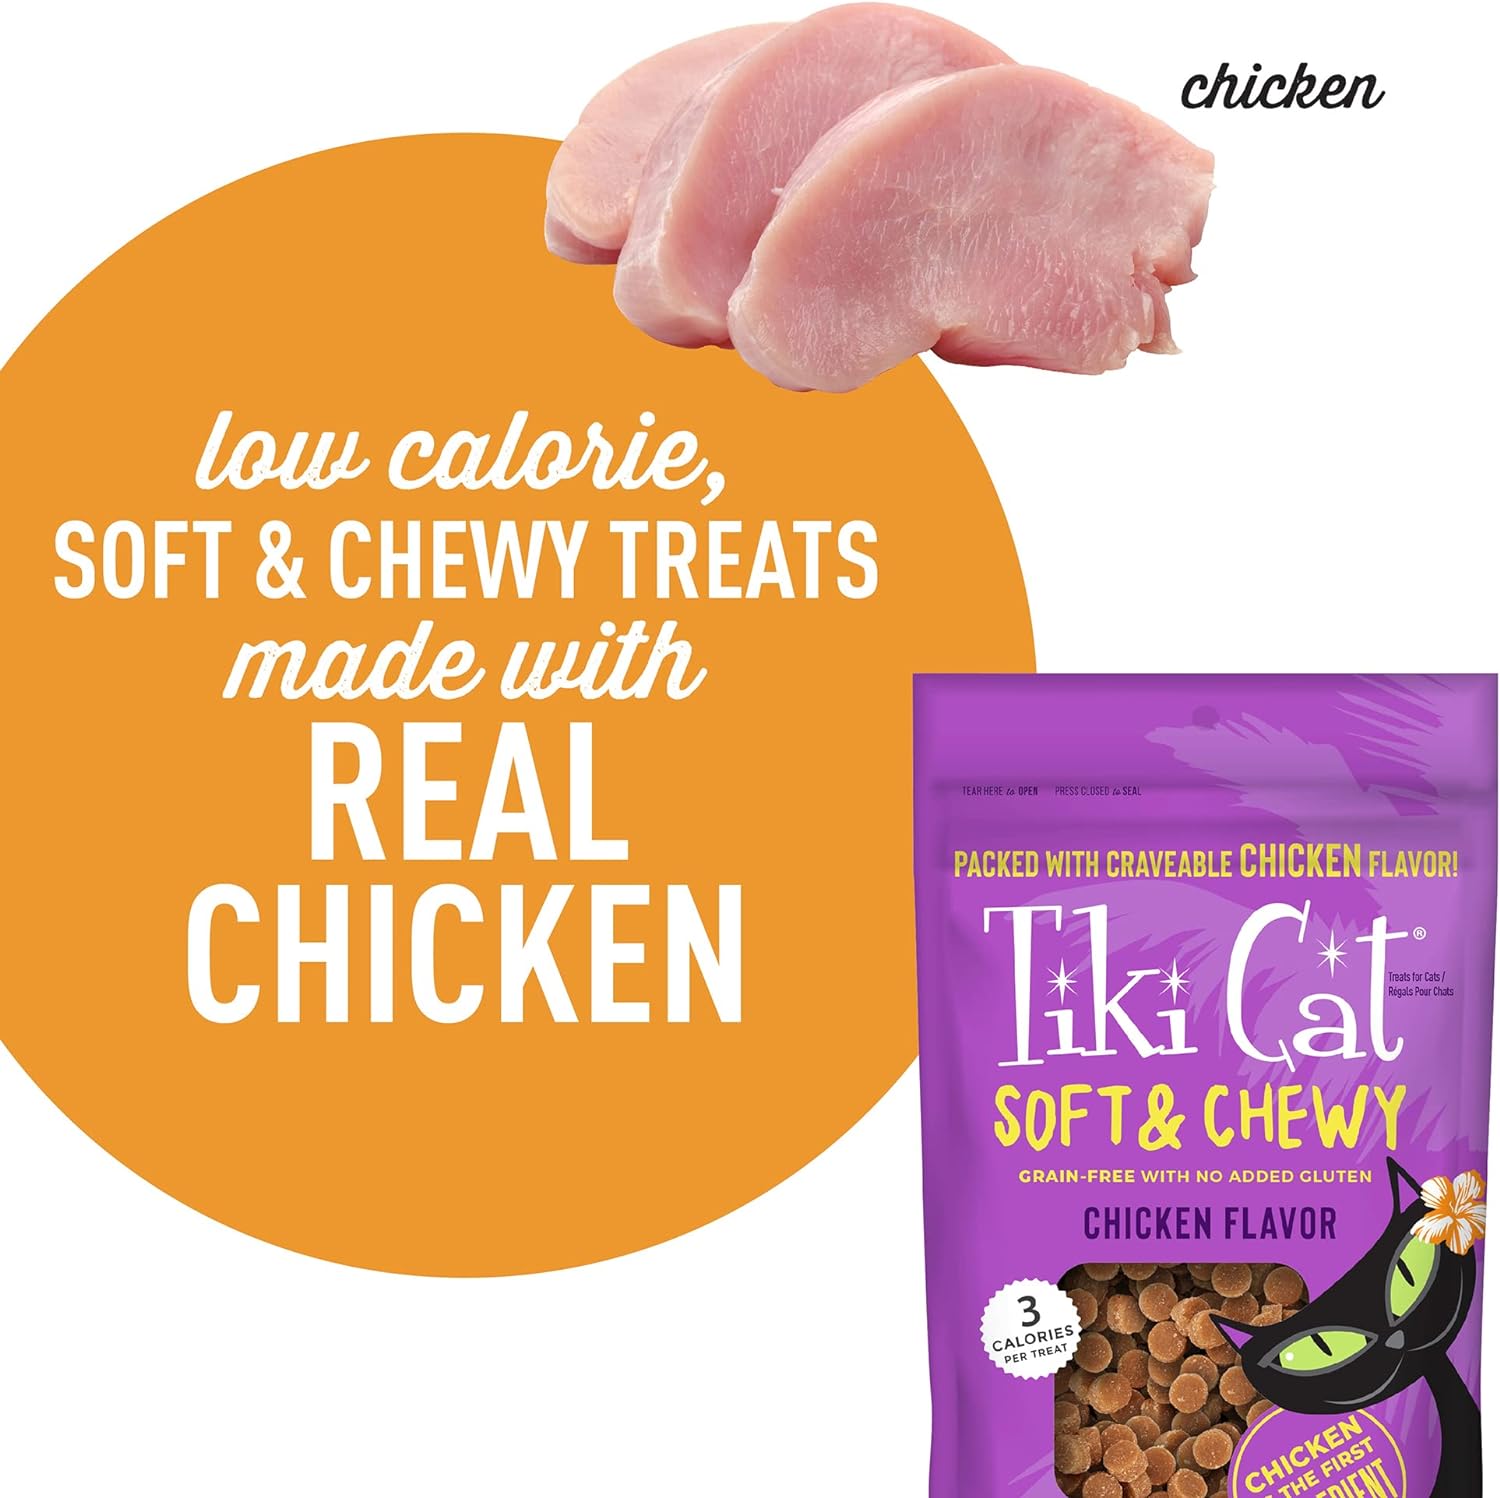 Tiki Cat Soft & Chewy Treats, Chicken Flavor, 3 Calories Per Treat with Grain-Free and No Added Gluten, 2 oz Pouch (Pack of 1) : Pet Supplies